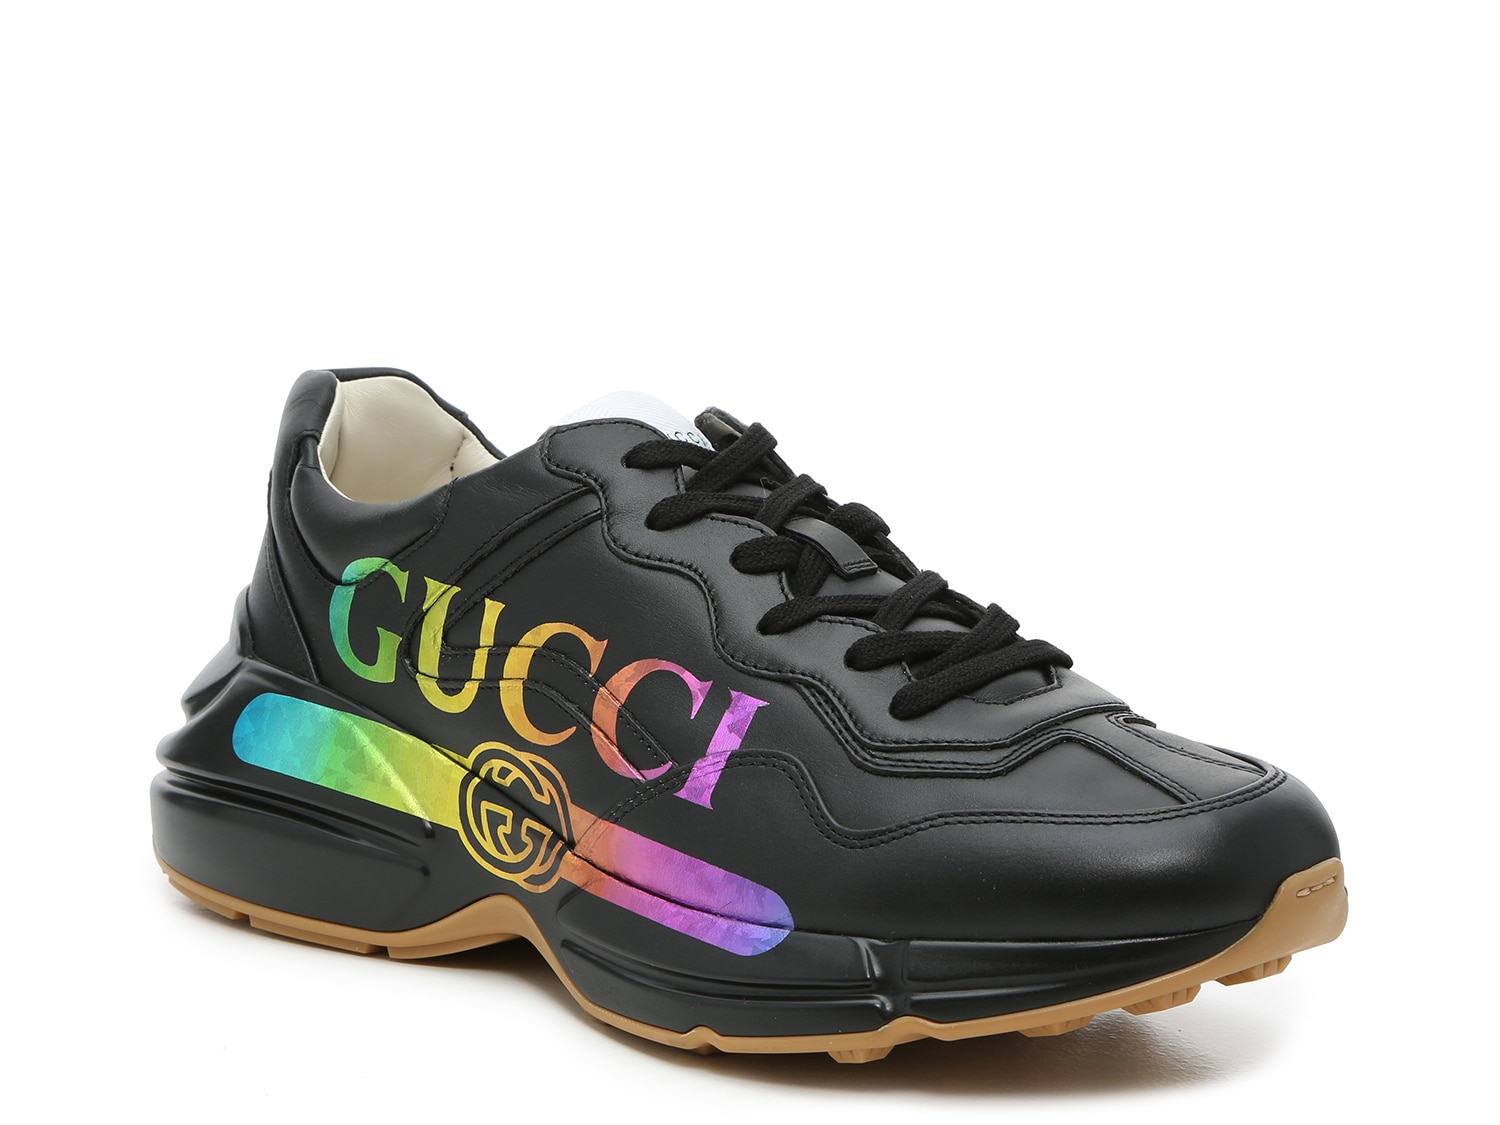 buy gucci shoes